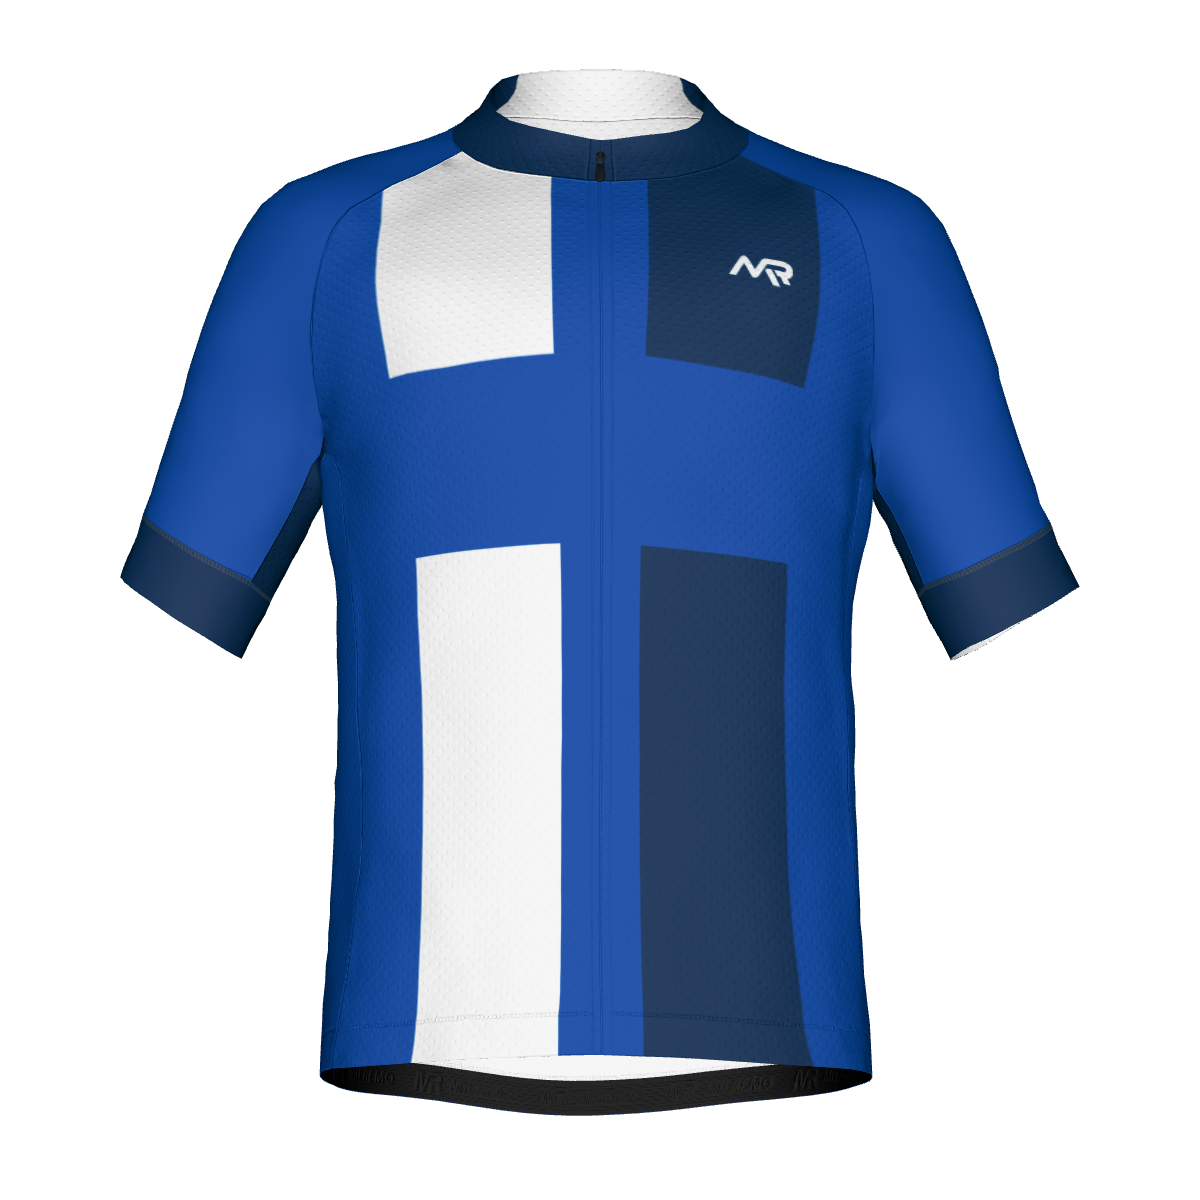 Endurance cycling jersey s/s | Form Fit